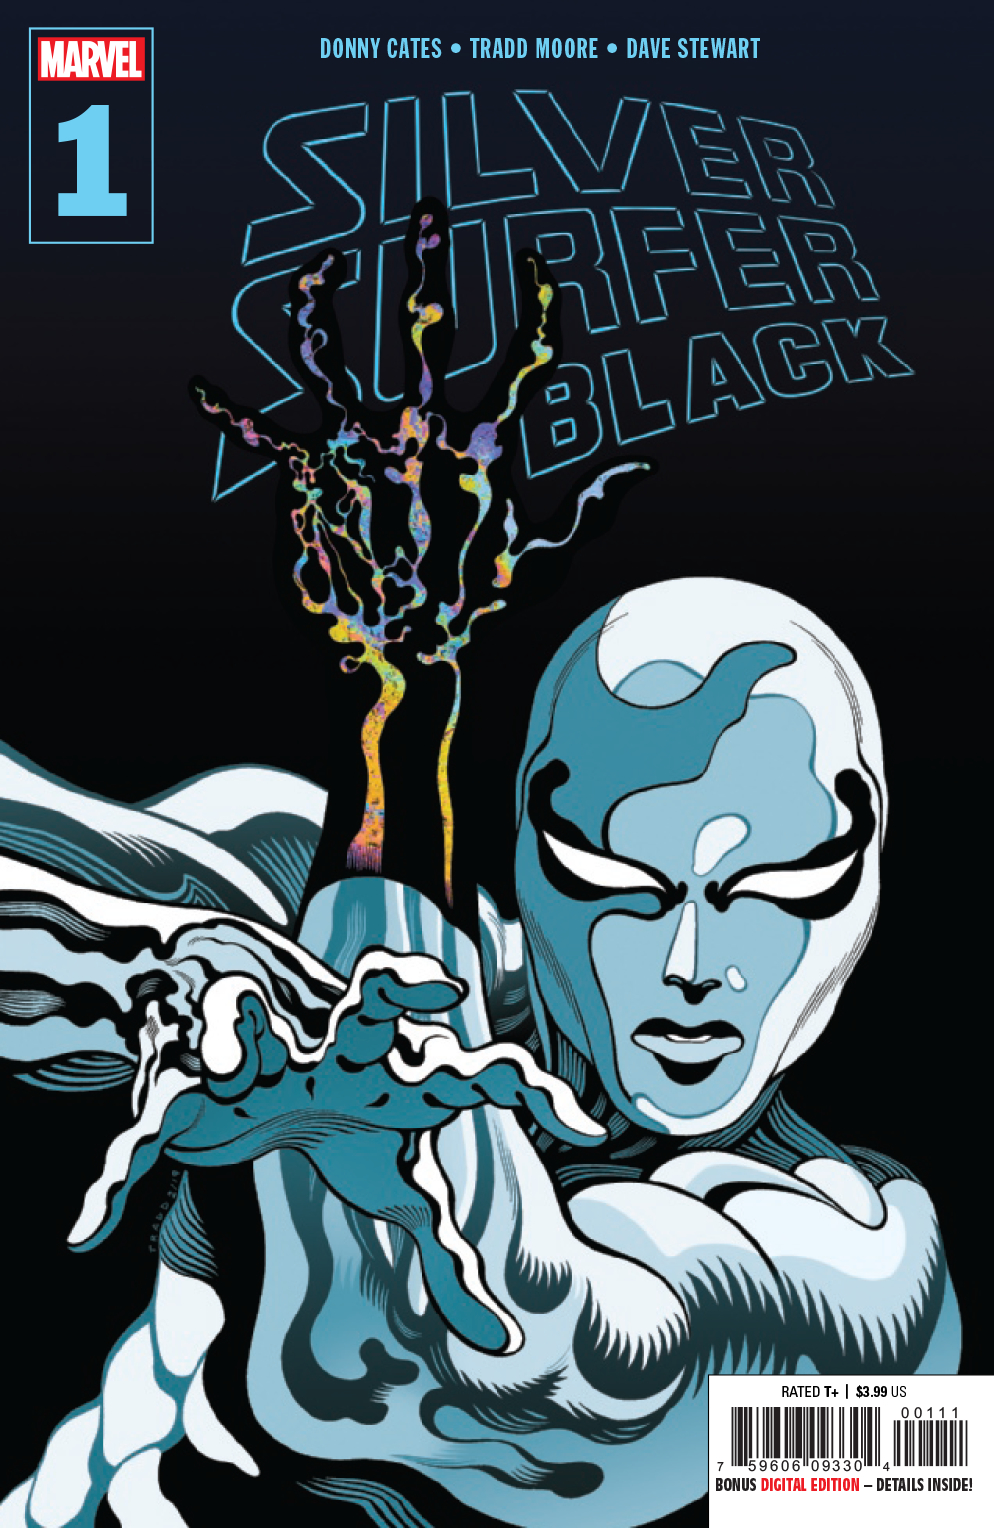 Silver Surfer Black no. 1 (1 of 5) (2019 Series)